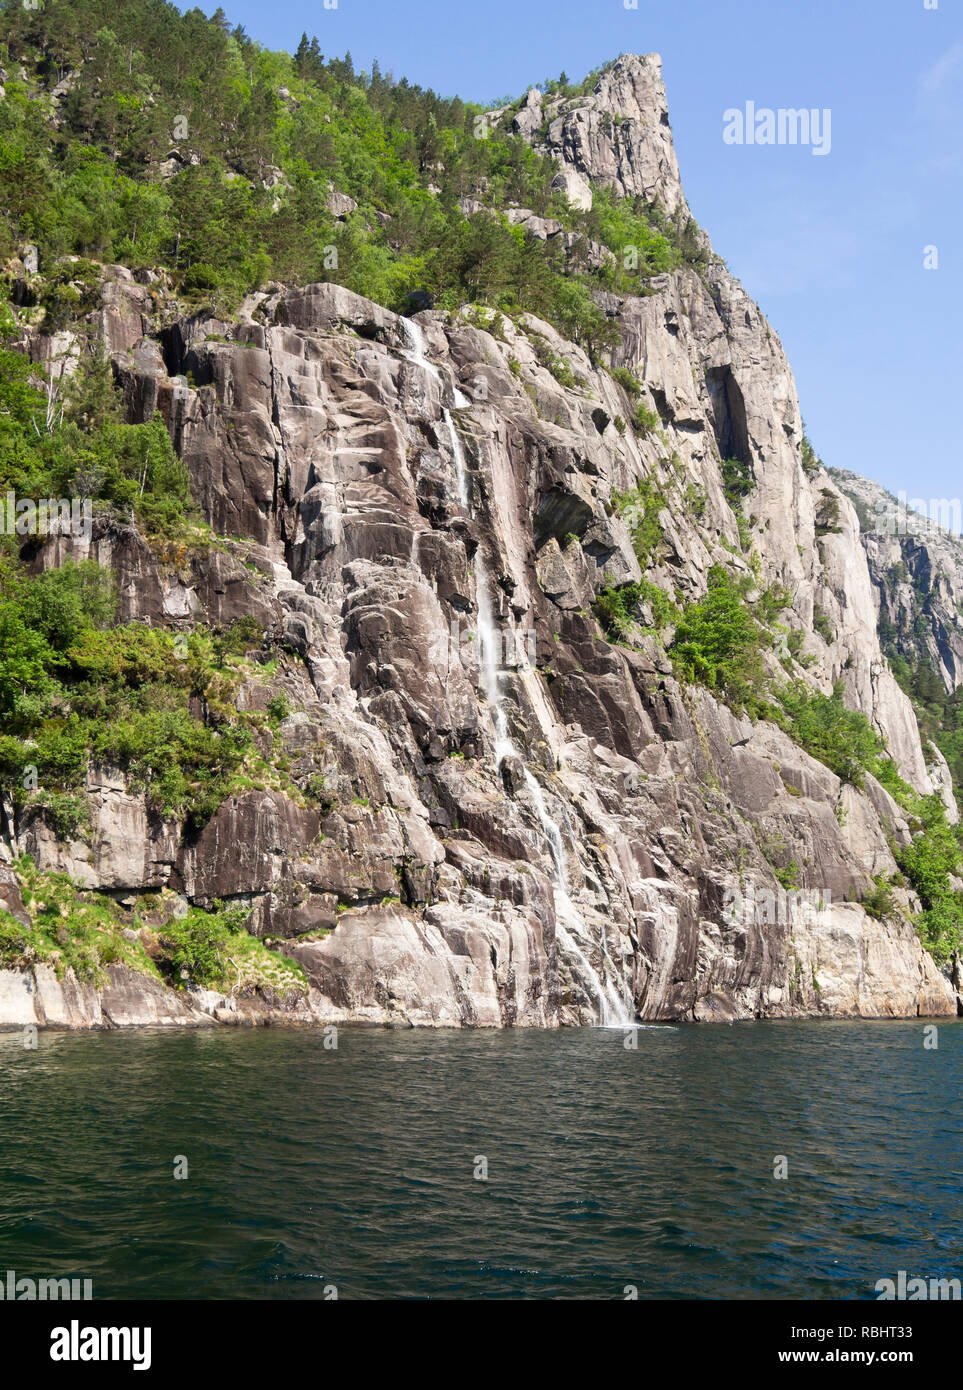 A one day fjord cruise in Lysefjorden east of Stavanger Norway, unspoiled nature with steep mountainsides, a cascade into the fjord Stock Photo